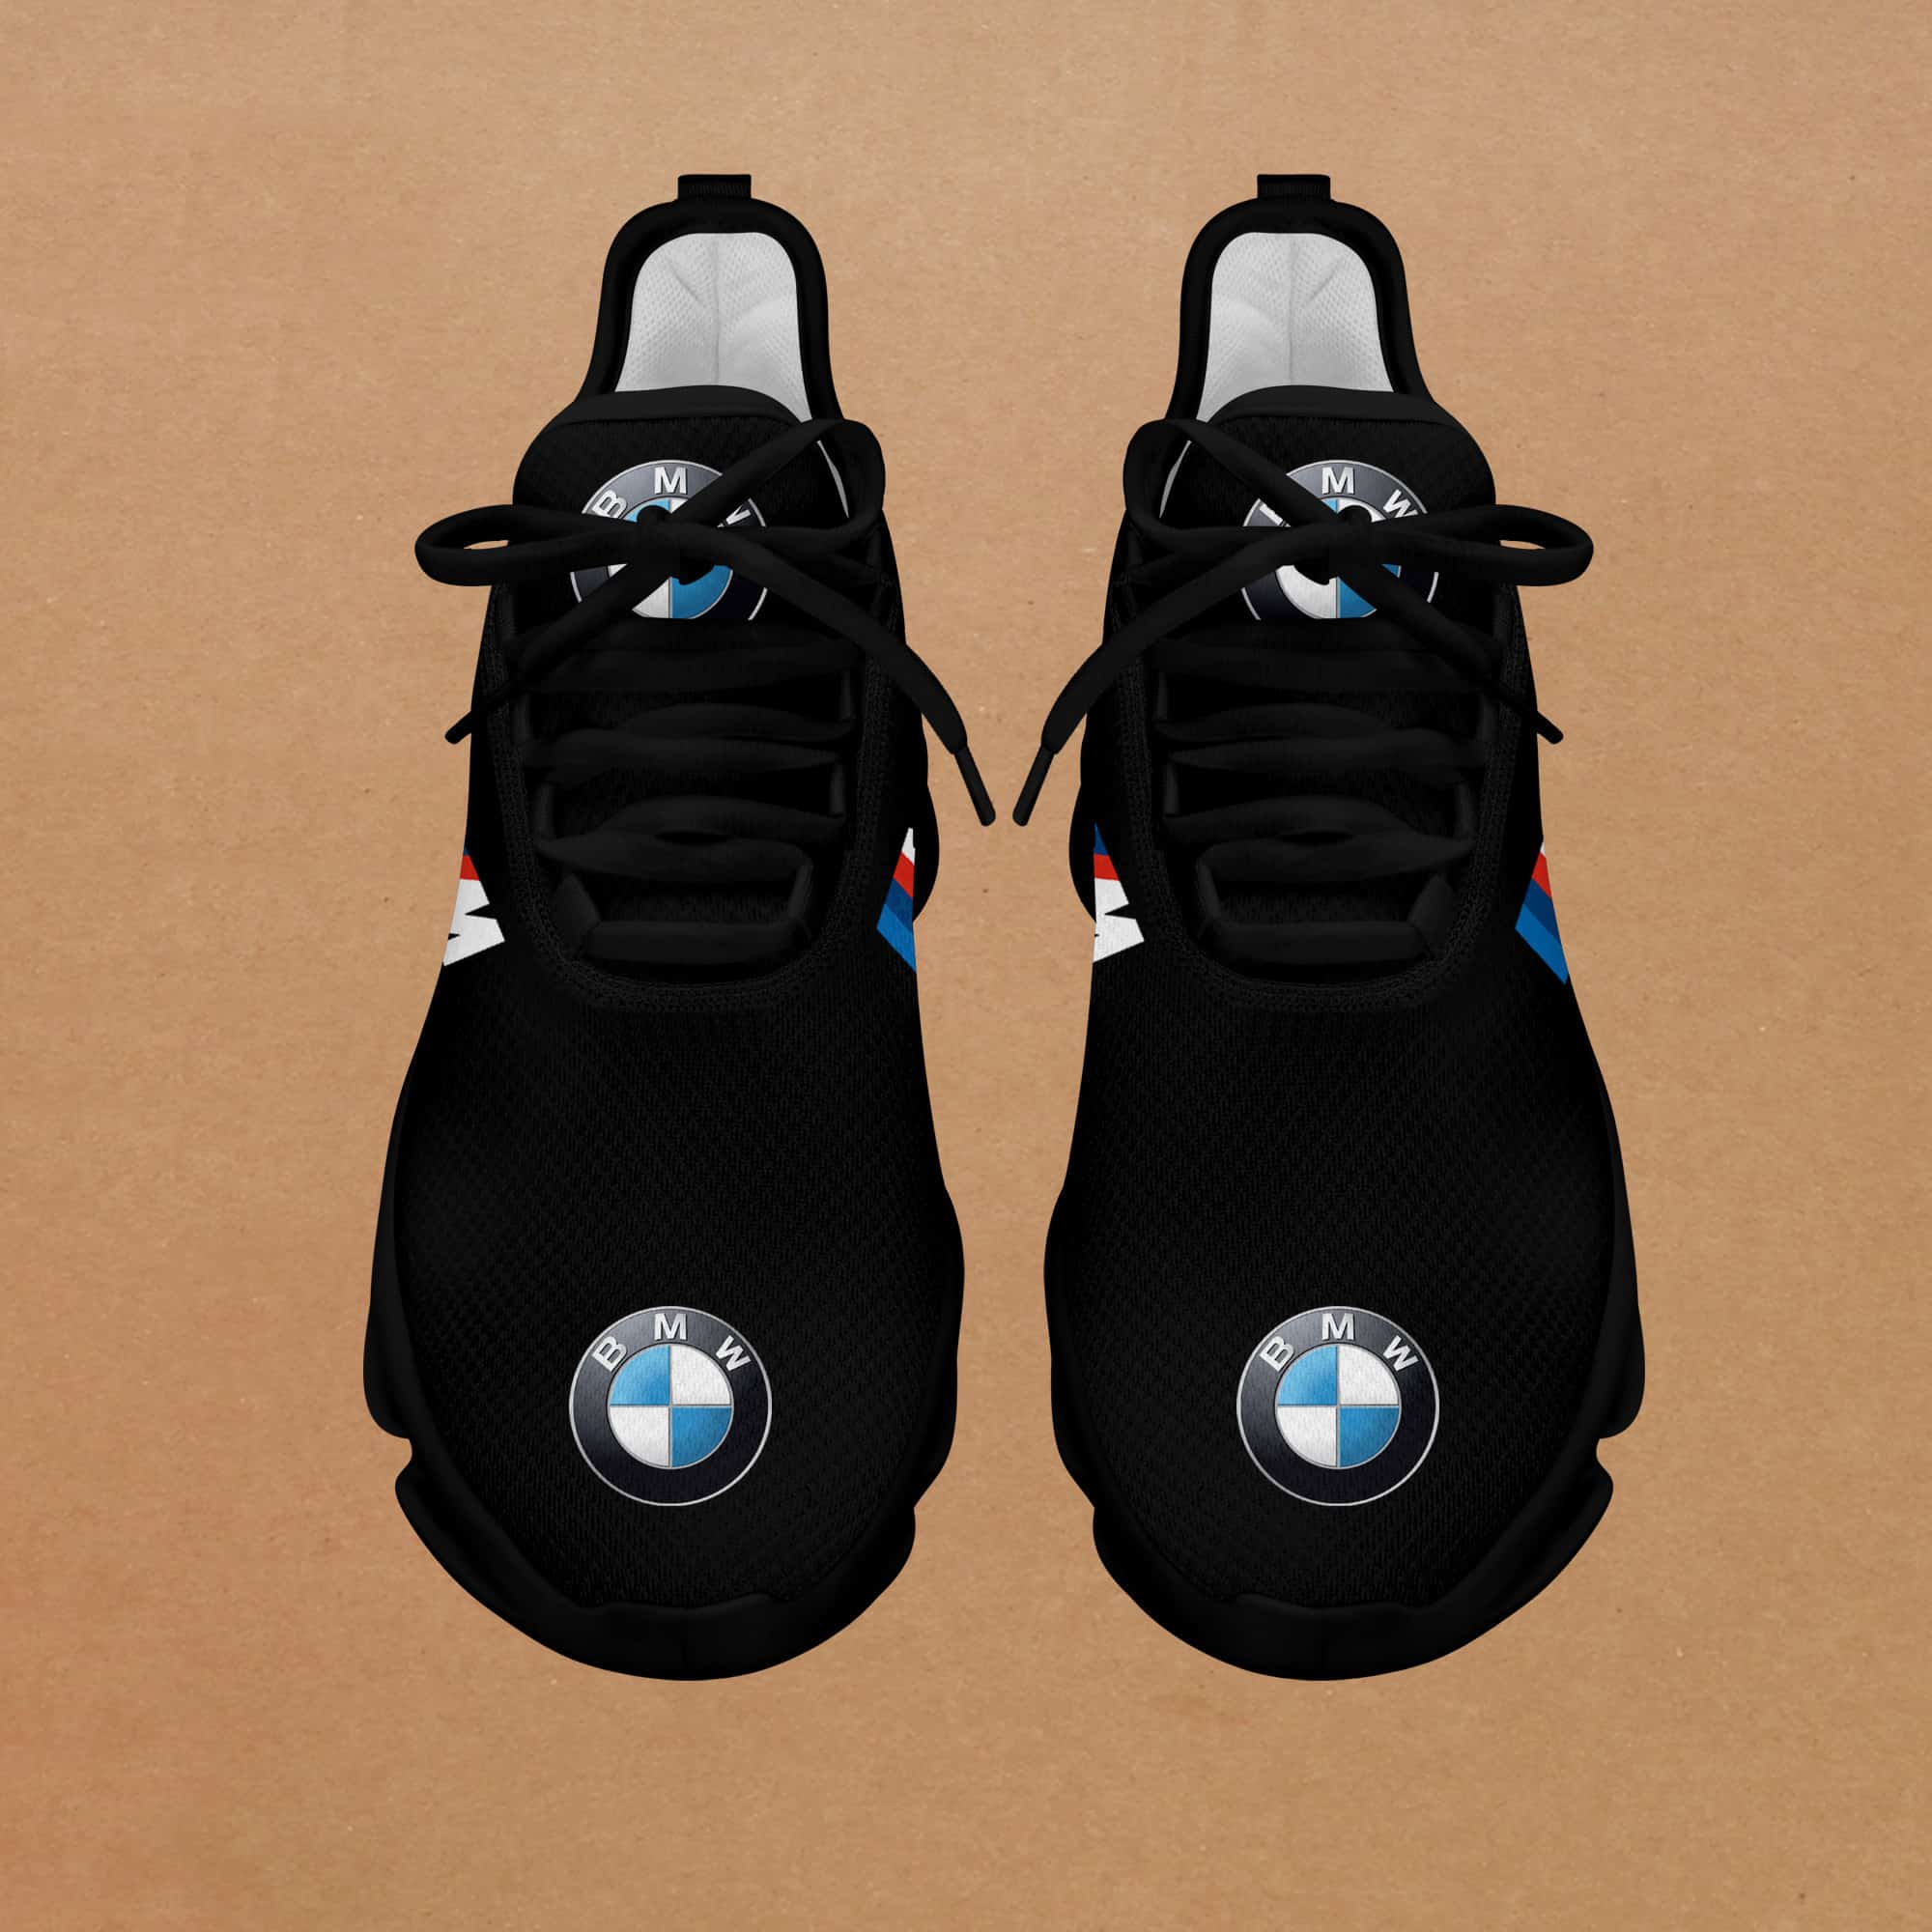 Bmw M Running Shoes Max Soul Shoes Sneakers Ver 6 4